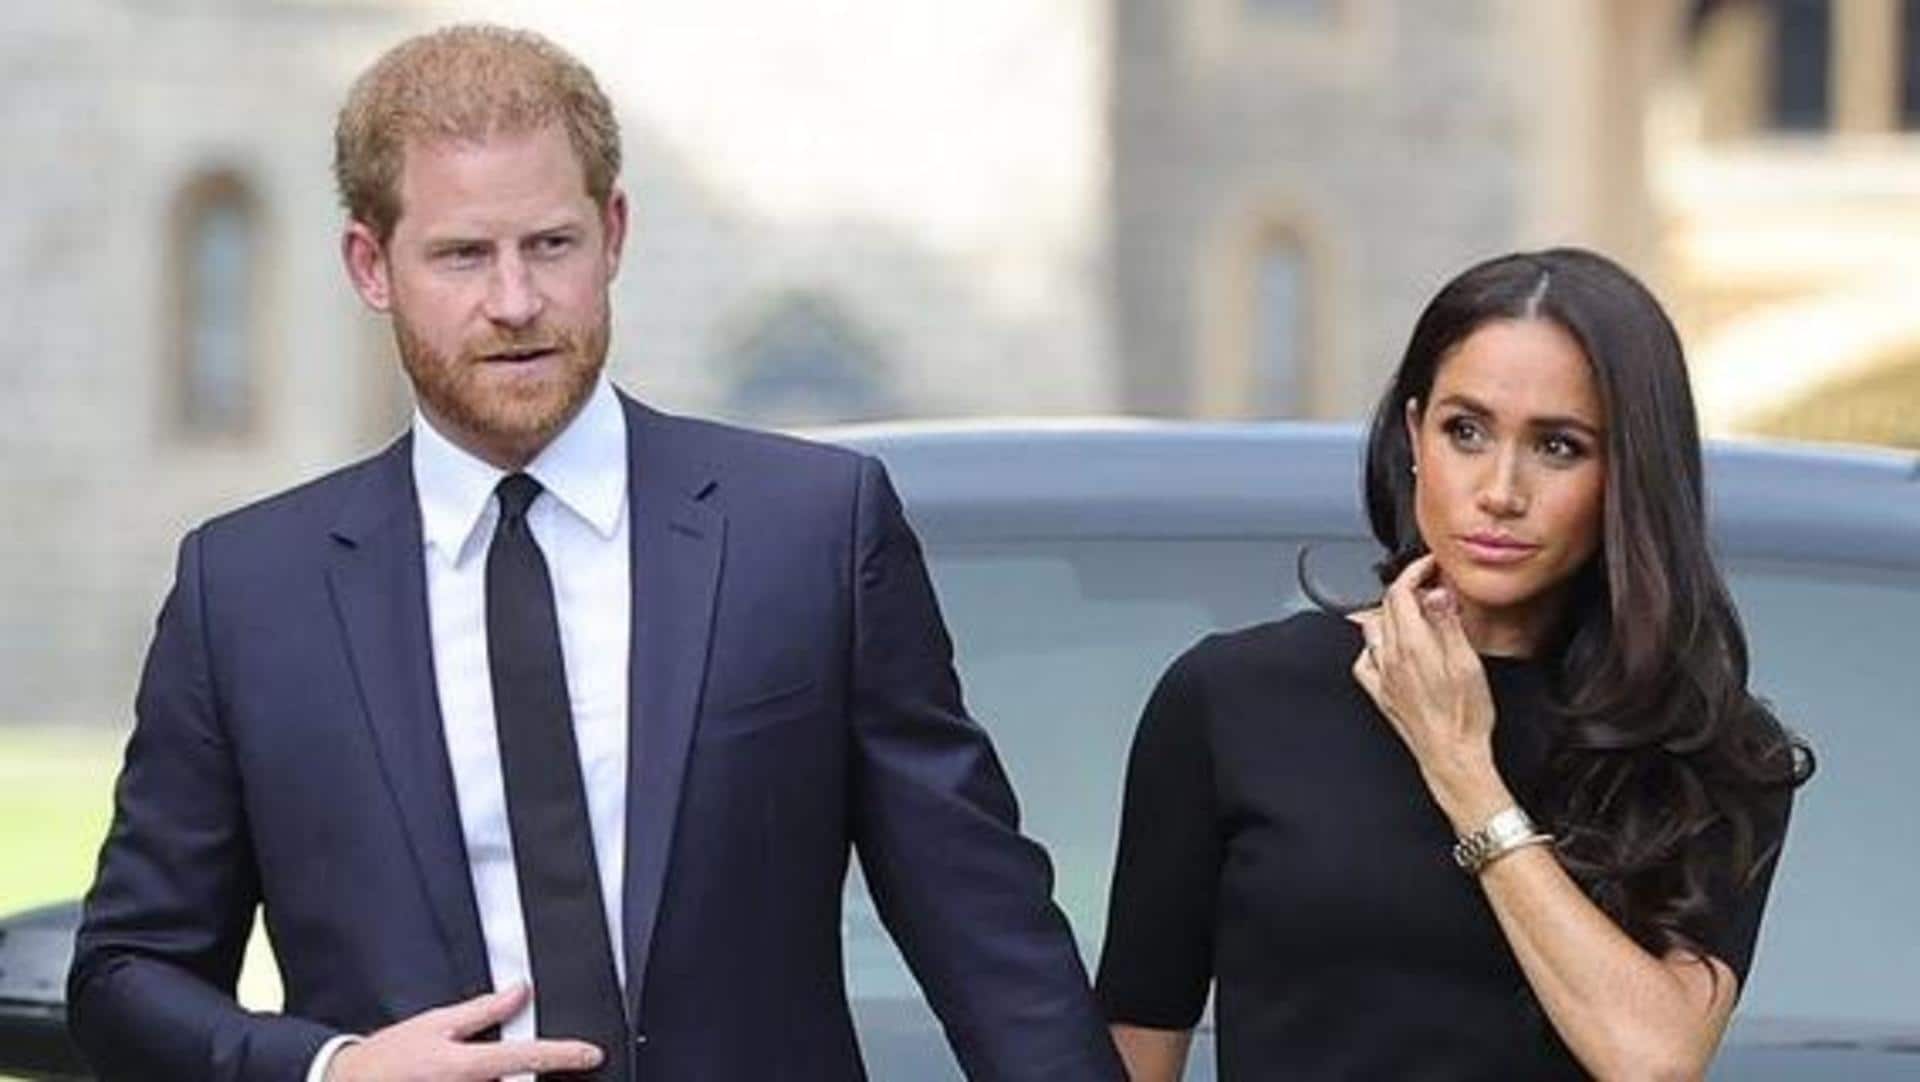 Harry-Meghan's spokesperson slams claims of car chase being PR stunt